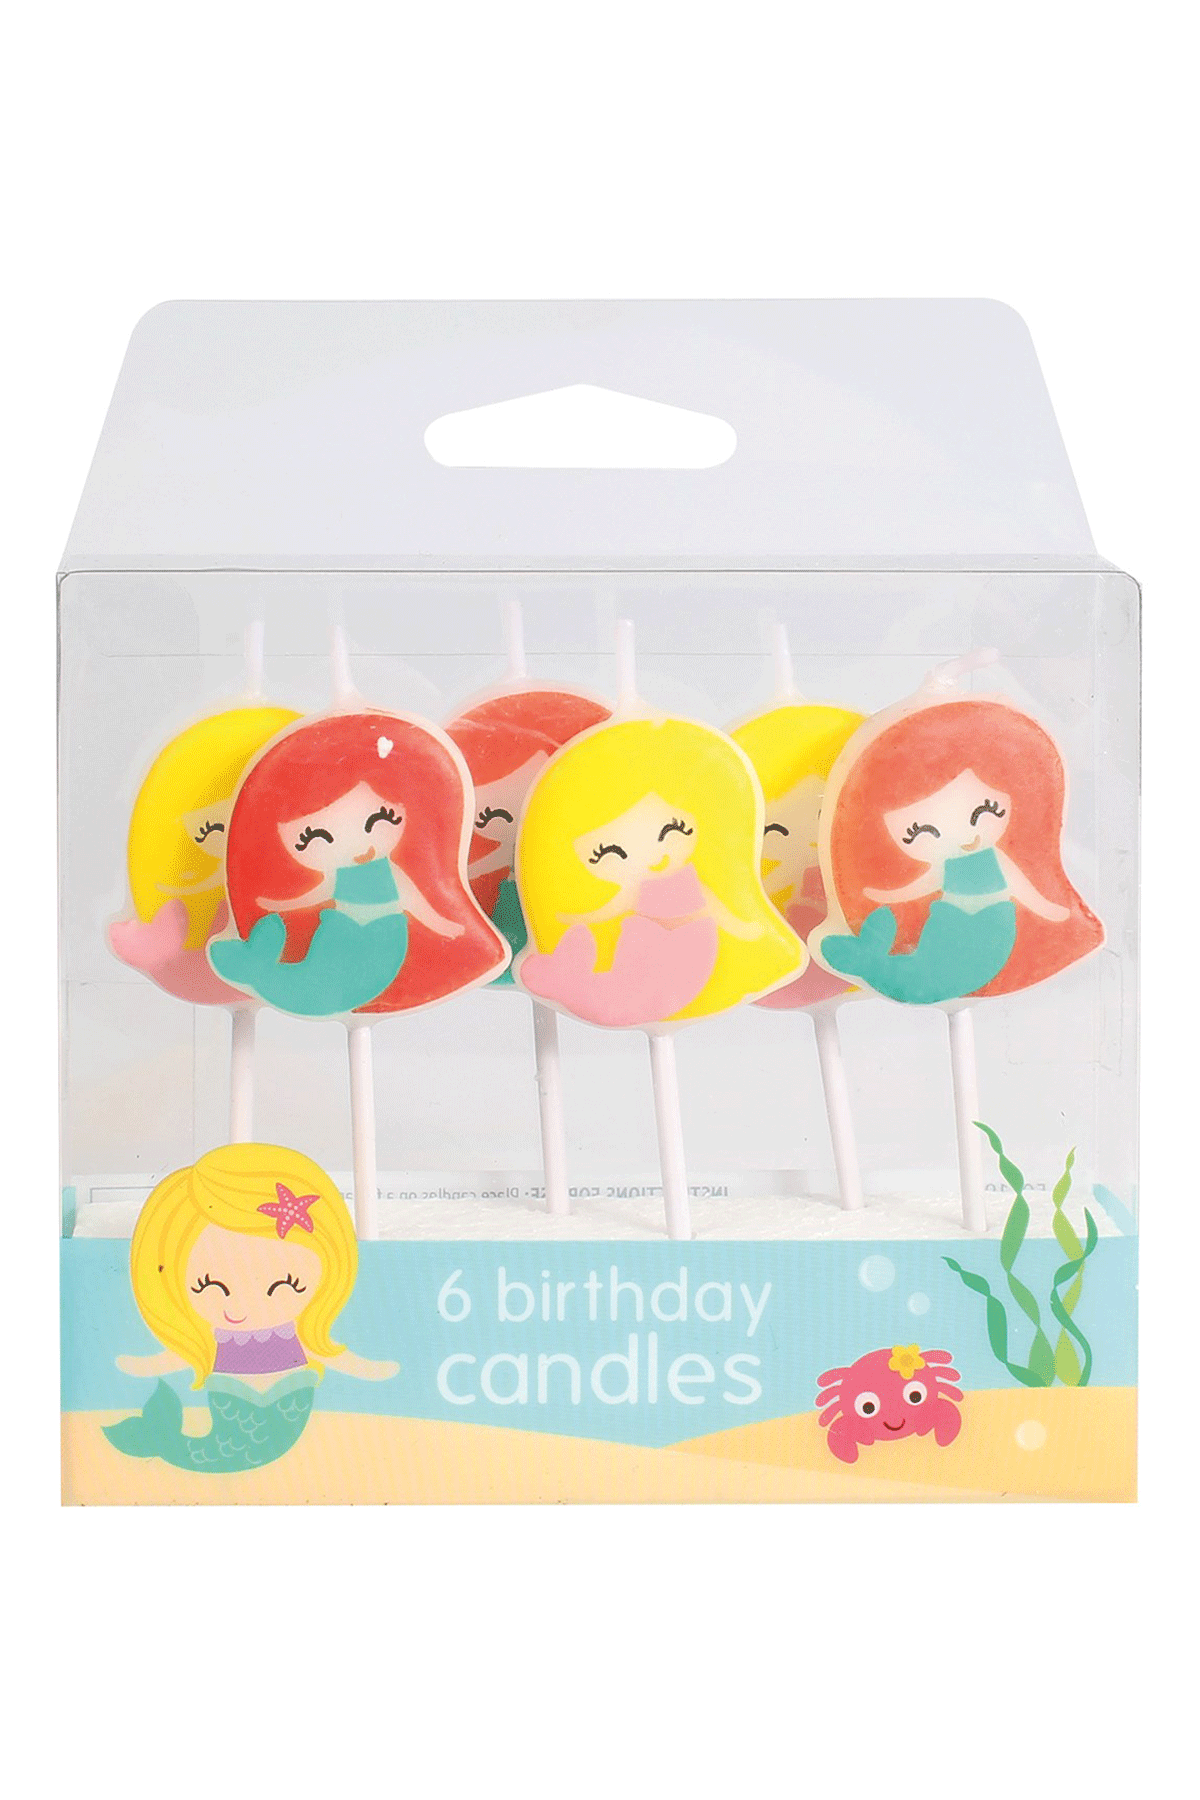 Mermaid Candles - 6 Piece Candles Baked With Love